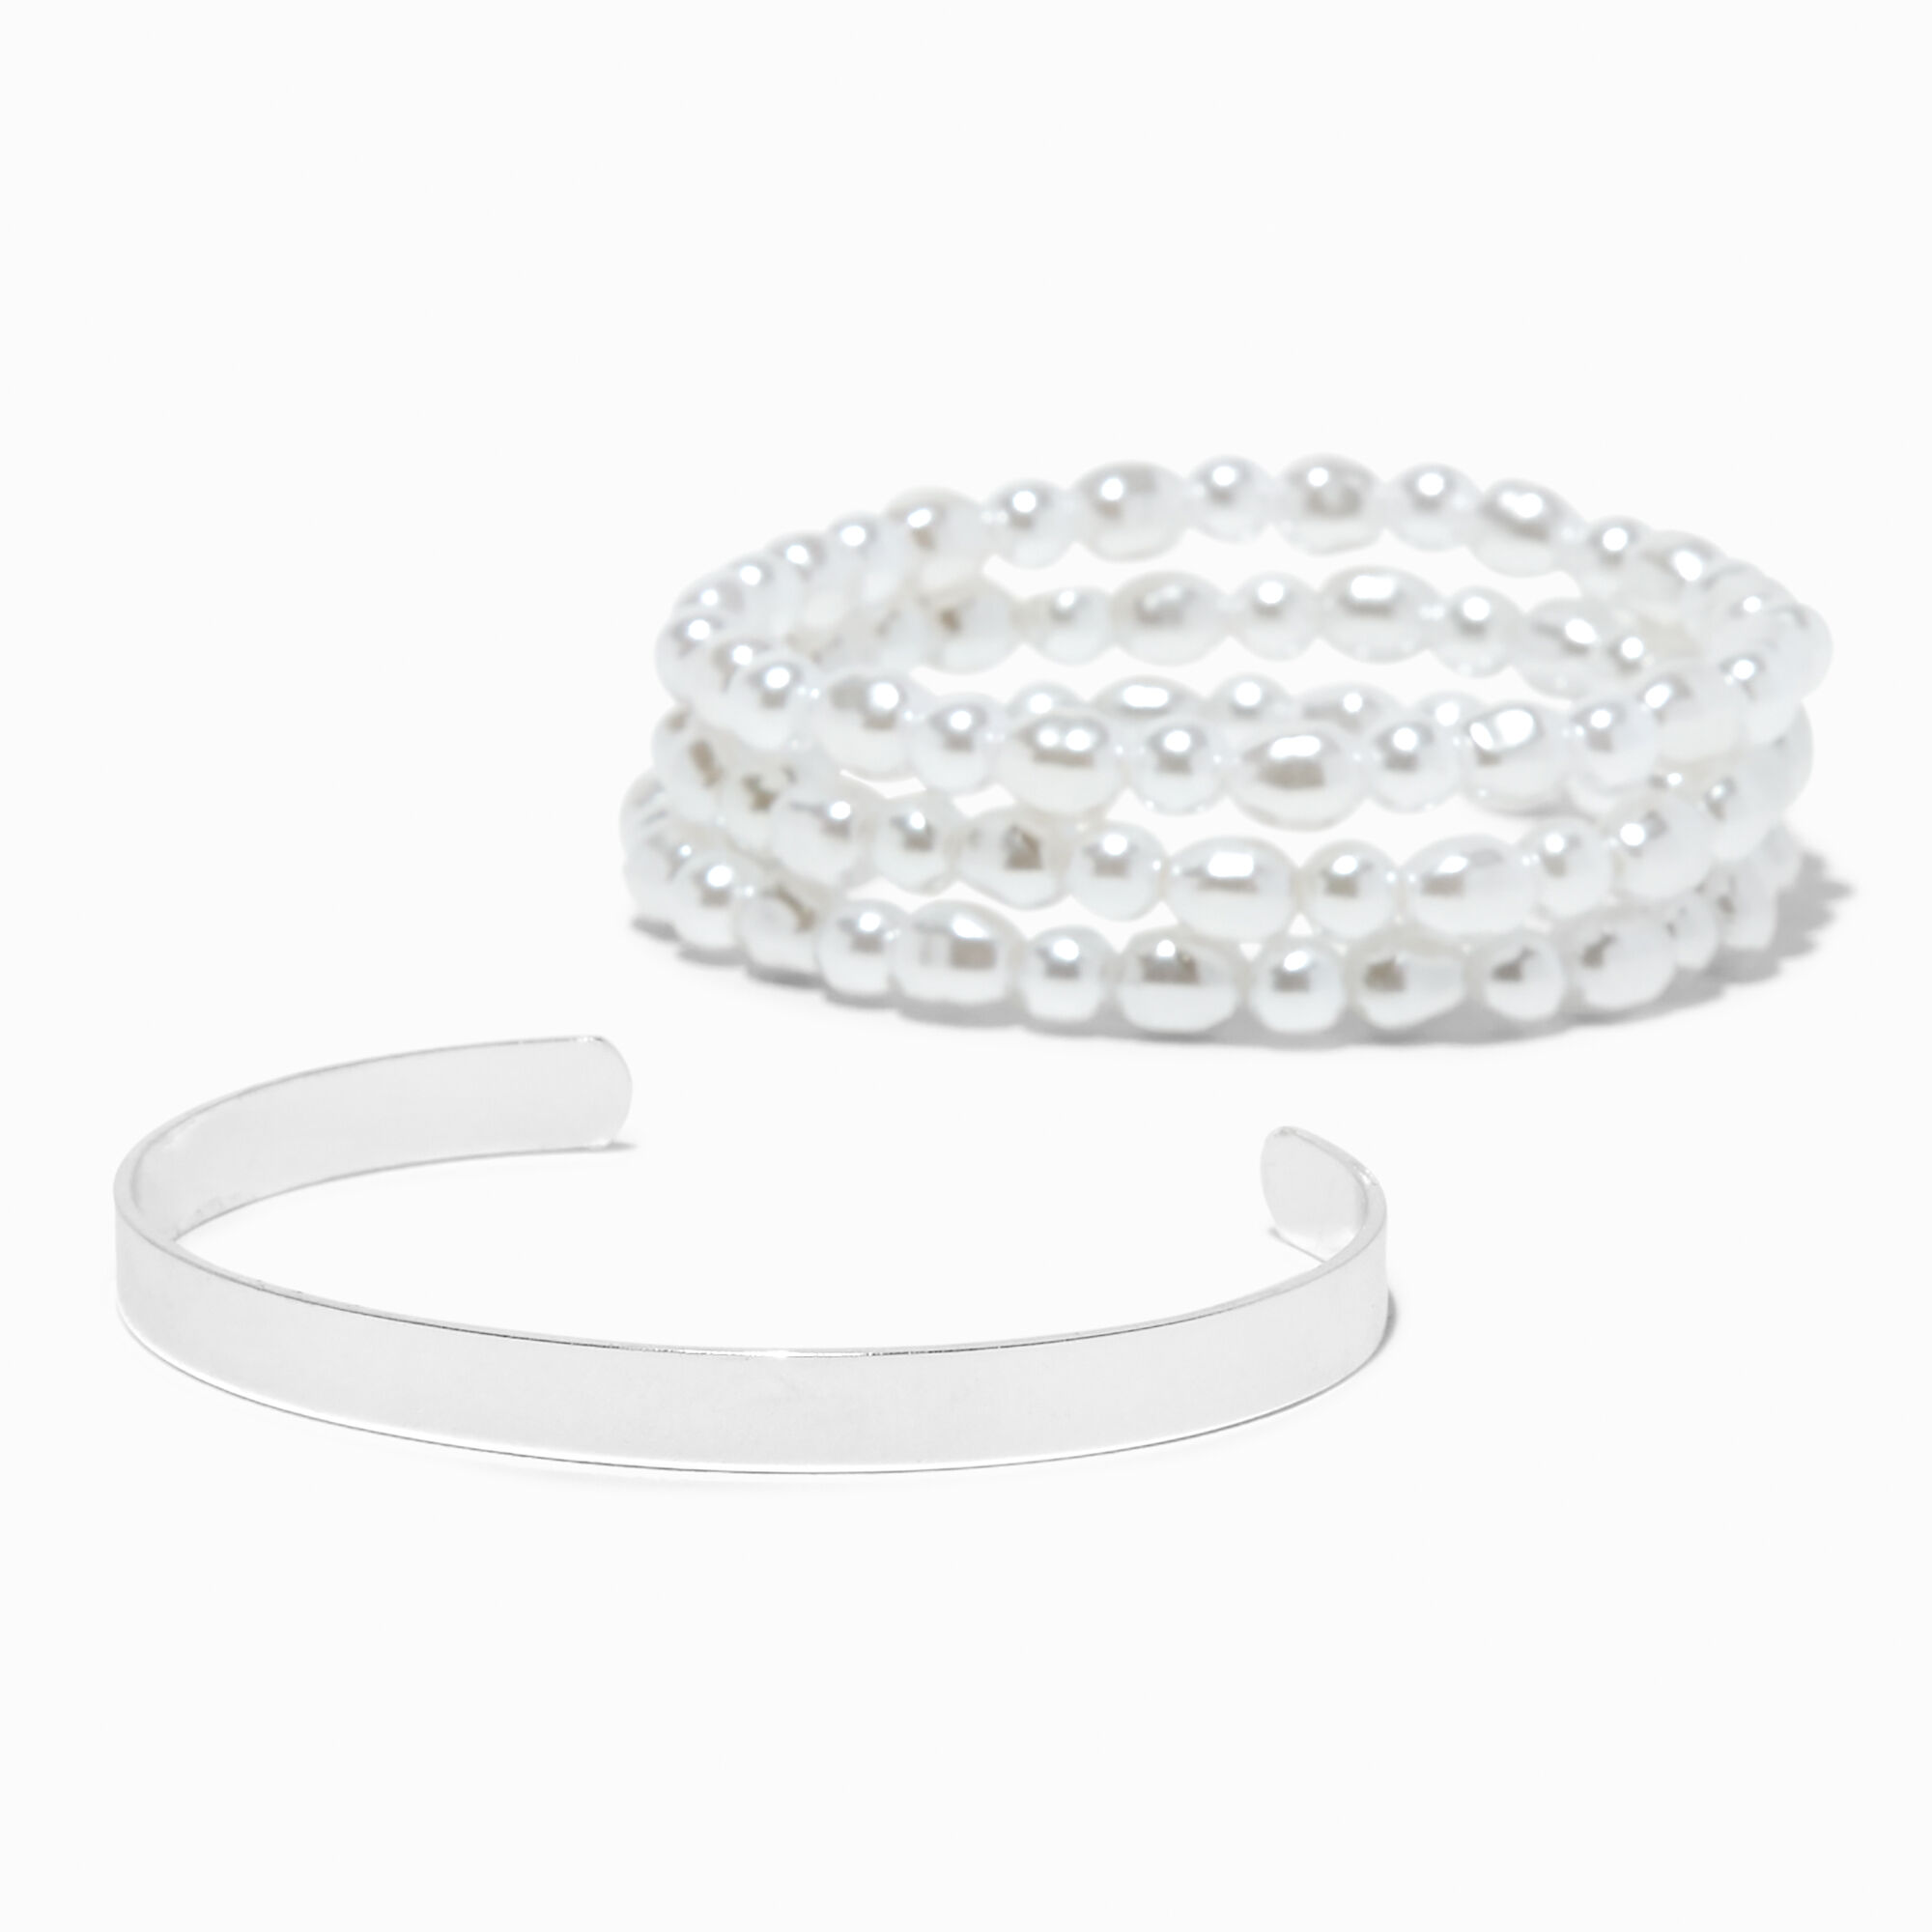 View Claires Pearl Stretch Tone Cuff Bracelet Set 4 Pack Silver information